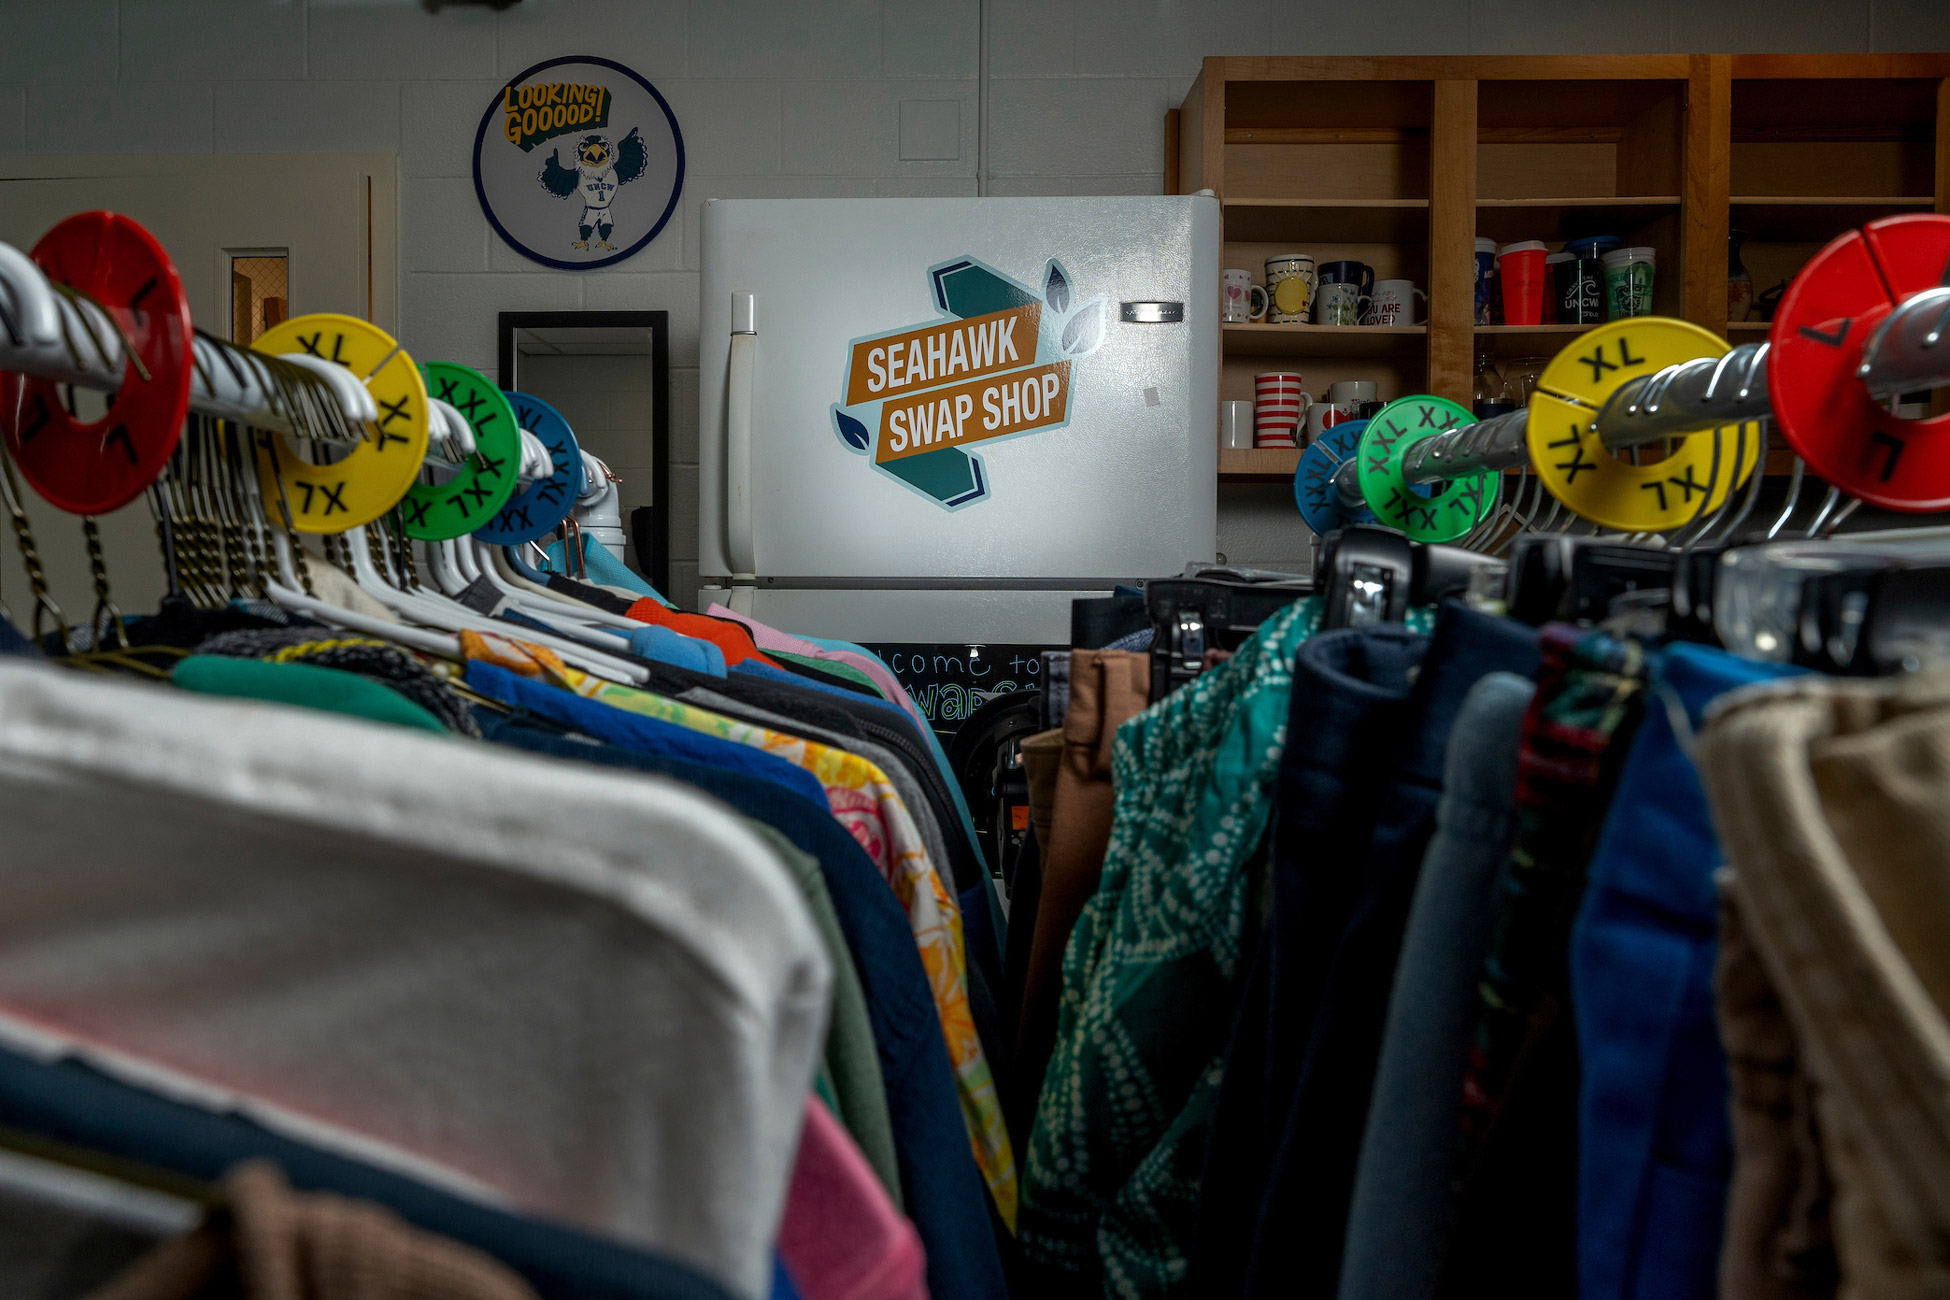 In partnership with SGA, the Seahawk Swap Shop is UNCW's first campus free store for students, faculty and staff.